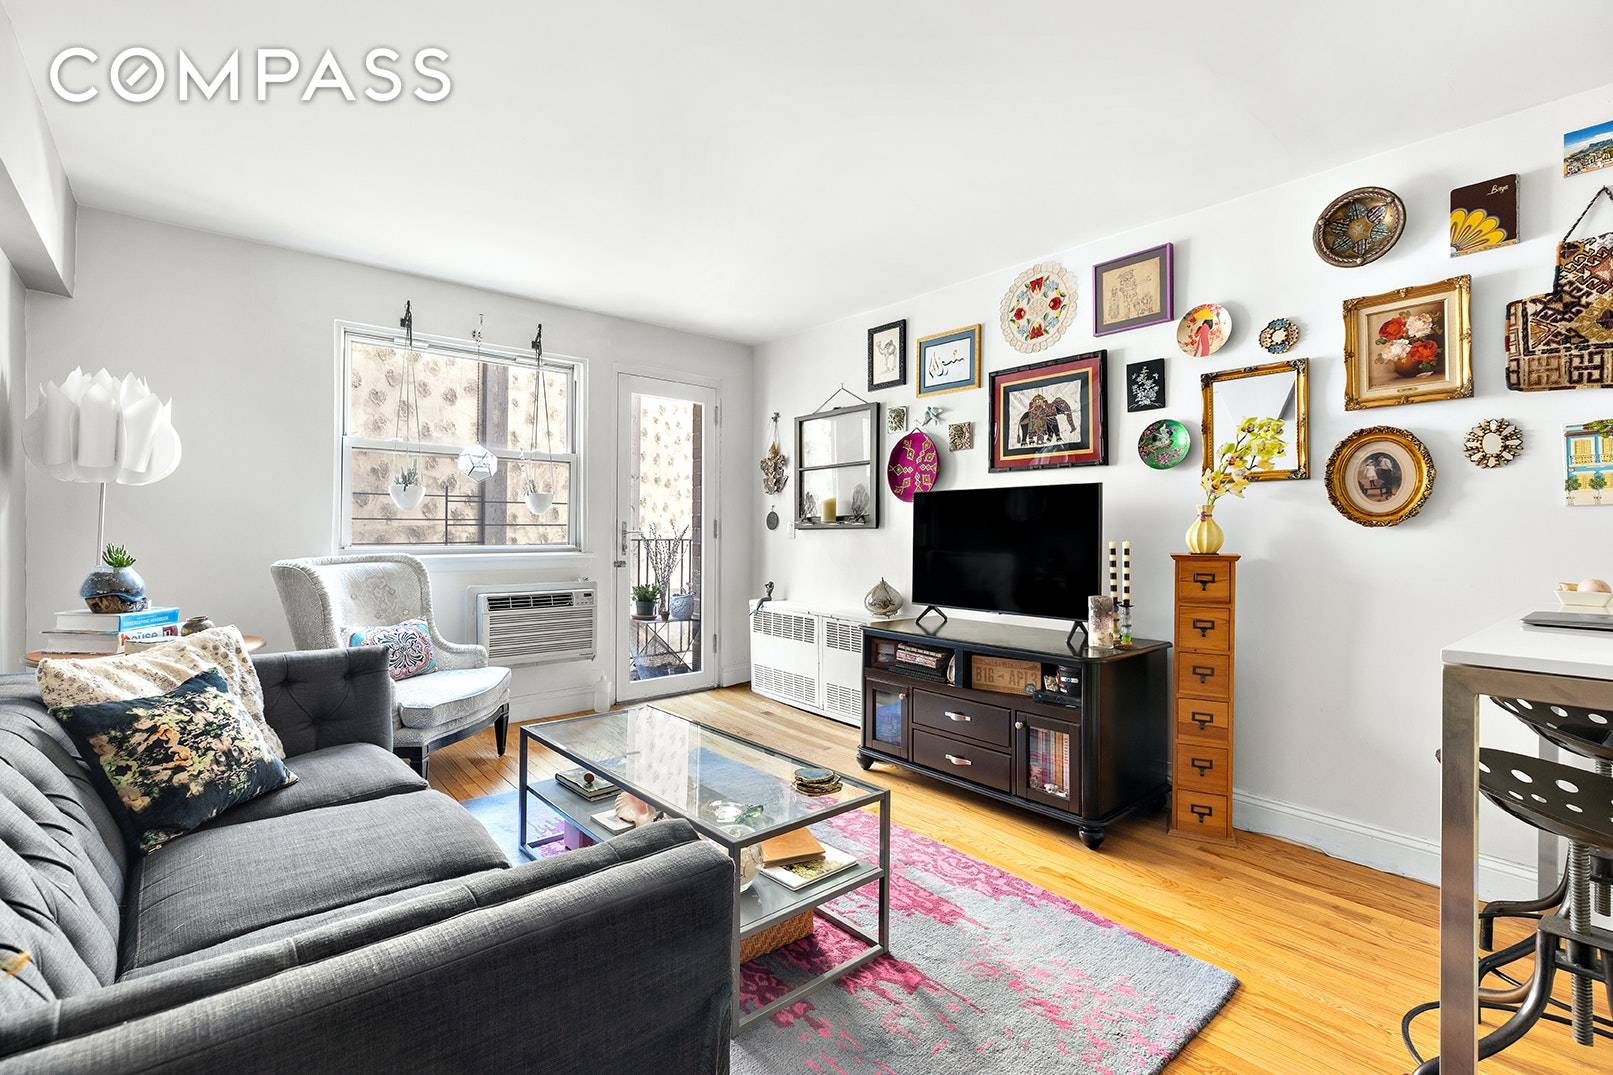 Just one block from Washington Square Park, this distinct loft like layout contains three levels of living, all joined via a spiral iron rail staircase.